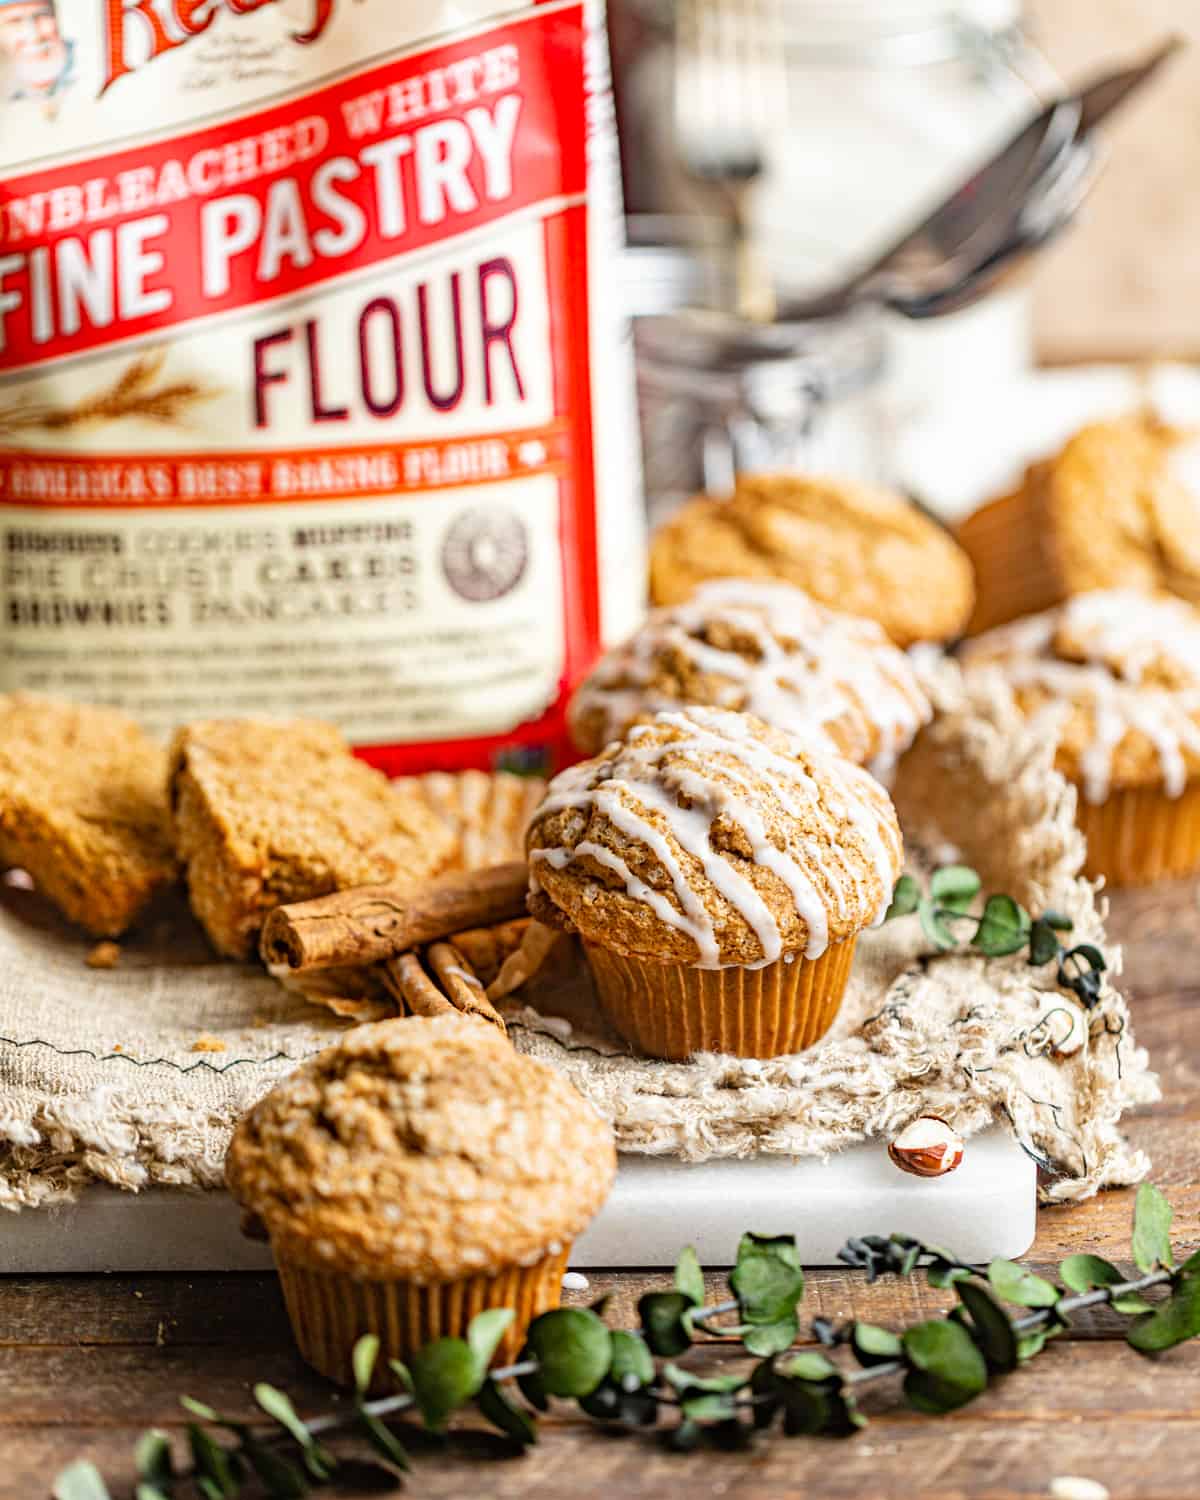 a gingerbread muffin on a wood table in front of a bag of pastry flour.